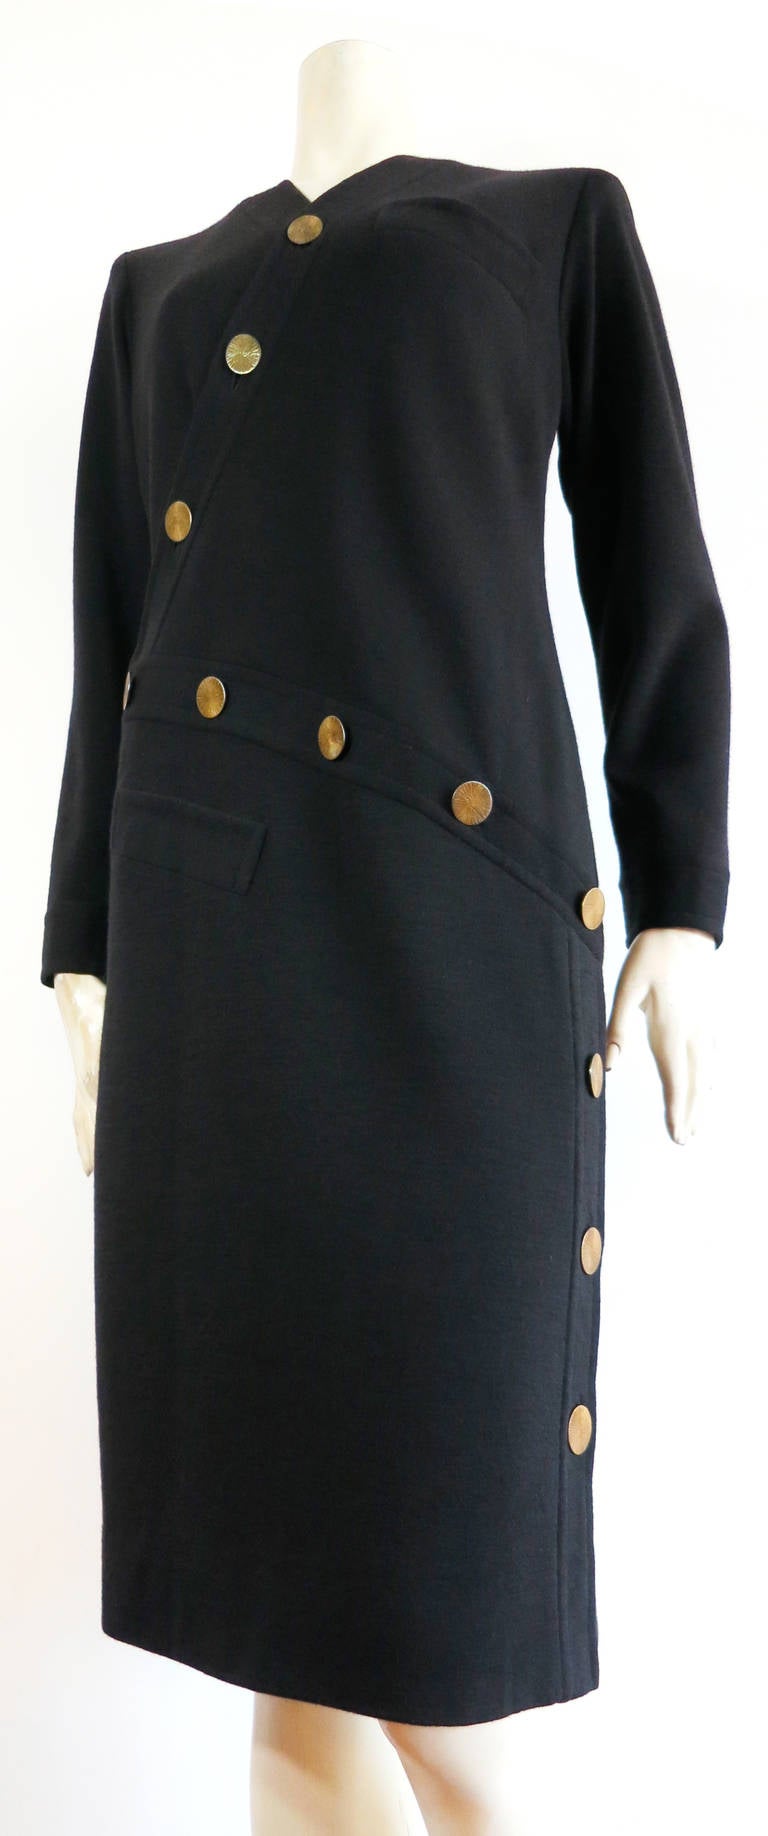 Vintage YVES SAINT LAURENT COUTURE Asymmetrical disk button day dress.

The dress is made of black, wool knit jersey with large, brass metal, disc buttons.

The top of the dress features an asymmetric, 'V'-neck opening.  The disk buttons at the